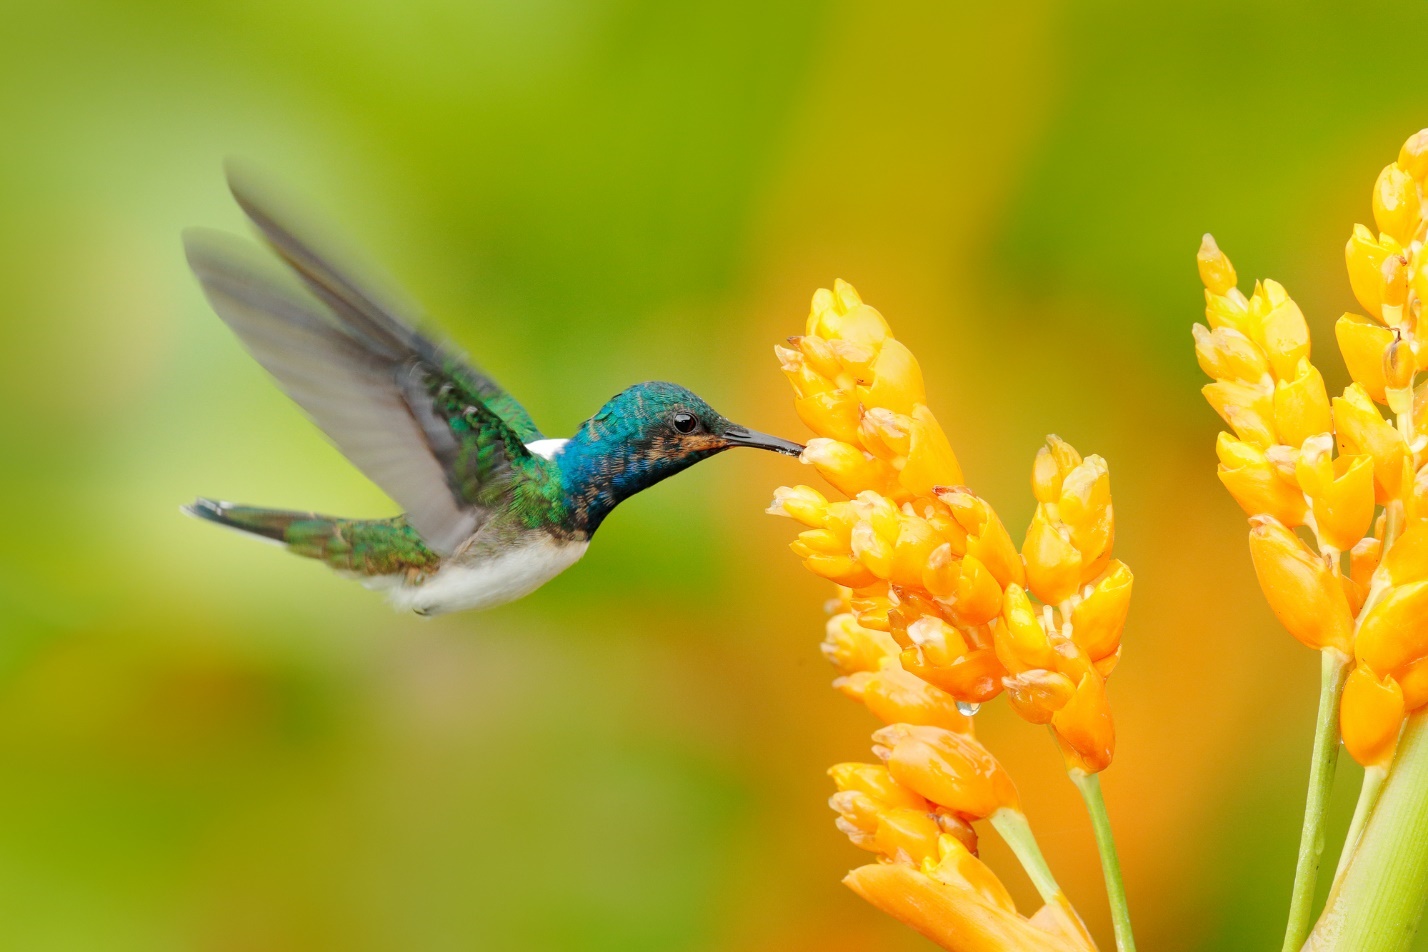 A hummingbird flying next to a flower

Description automatically generated